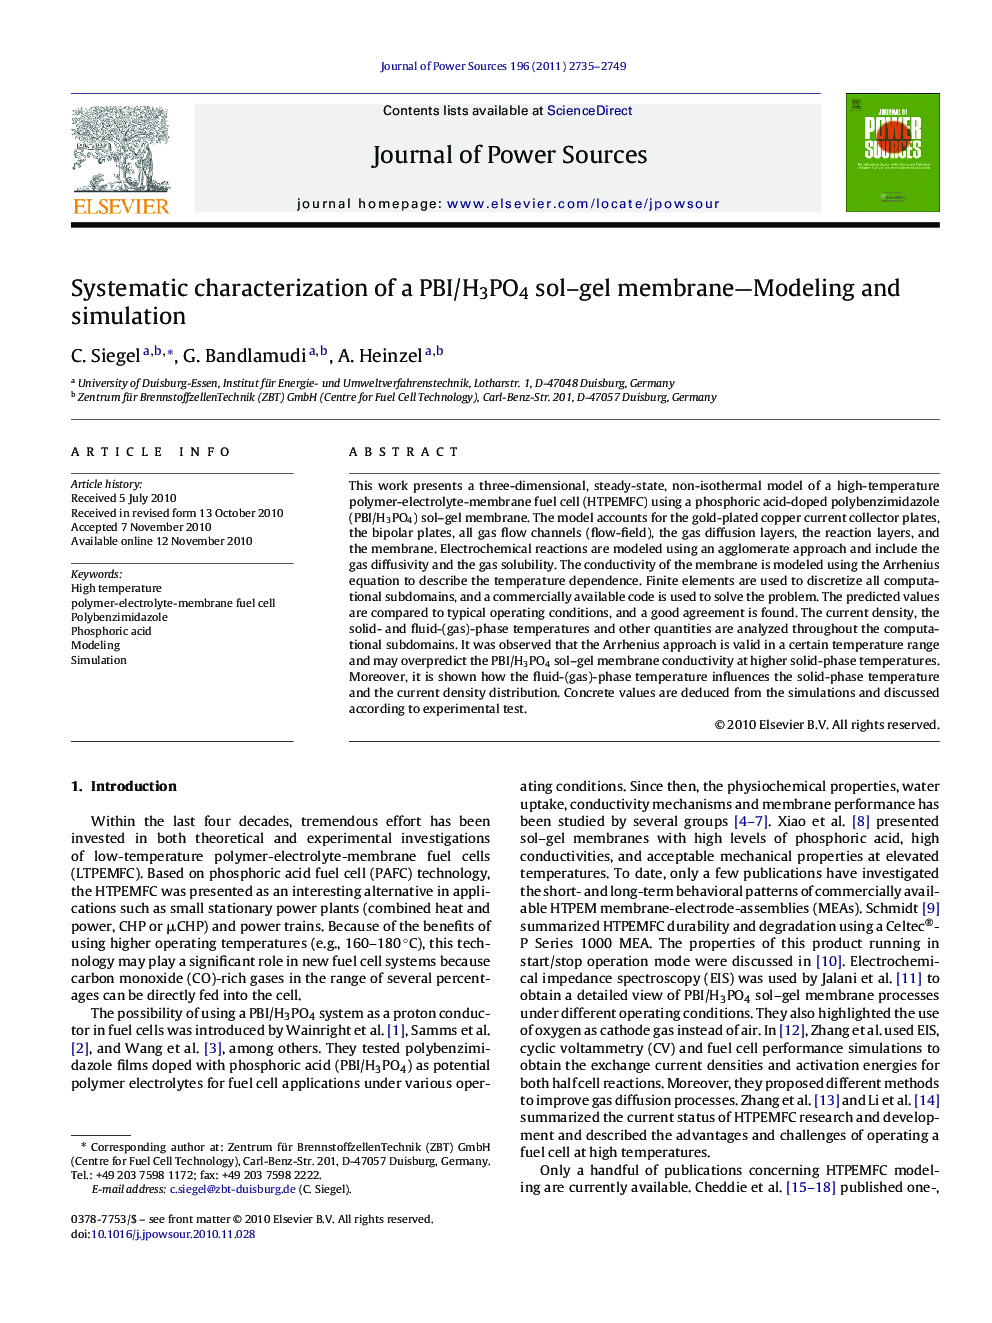 Systematic characterization of a PBI/H3PO4 sol-gel membrane-Modeling and simulation